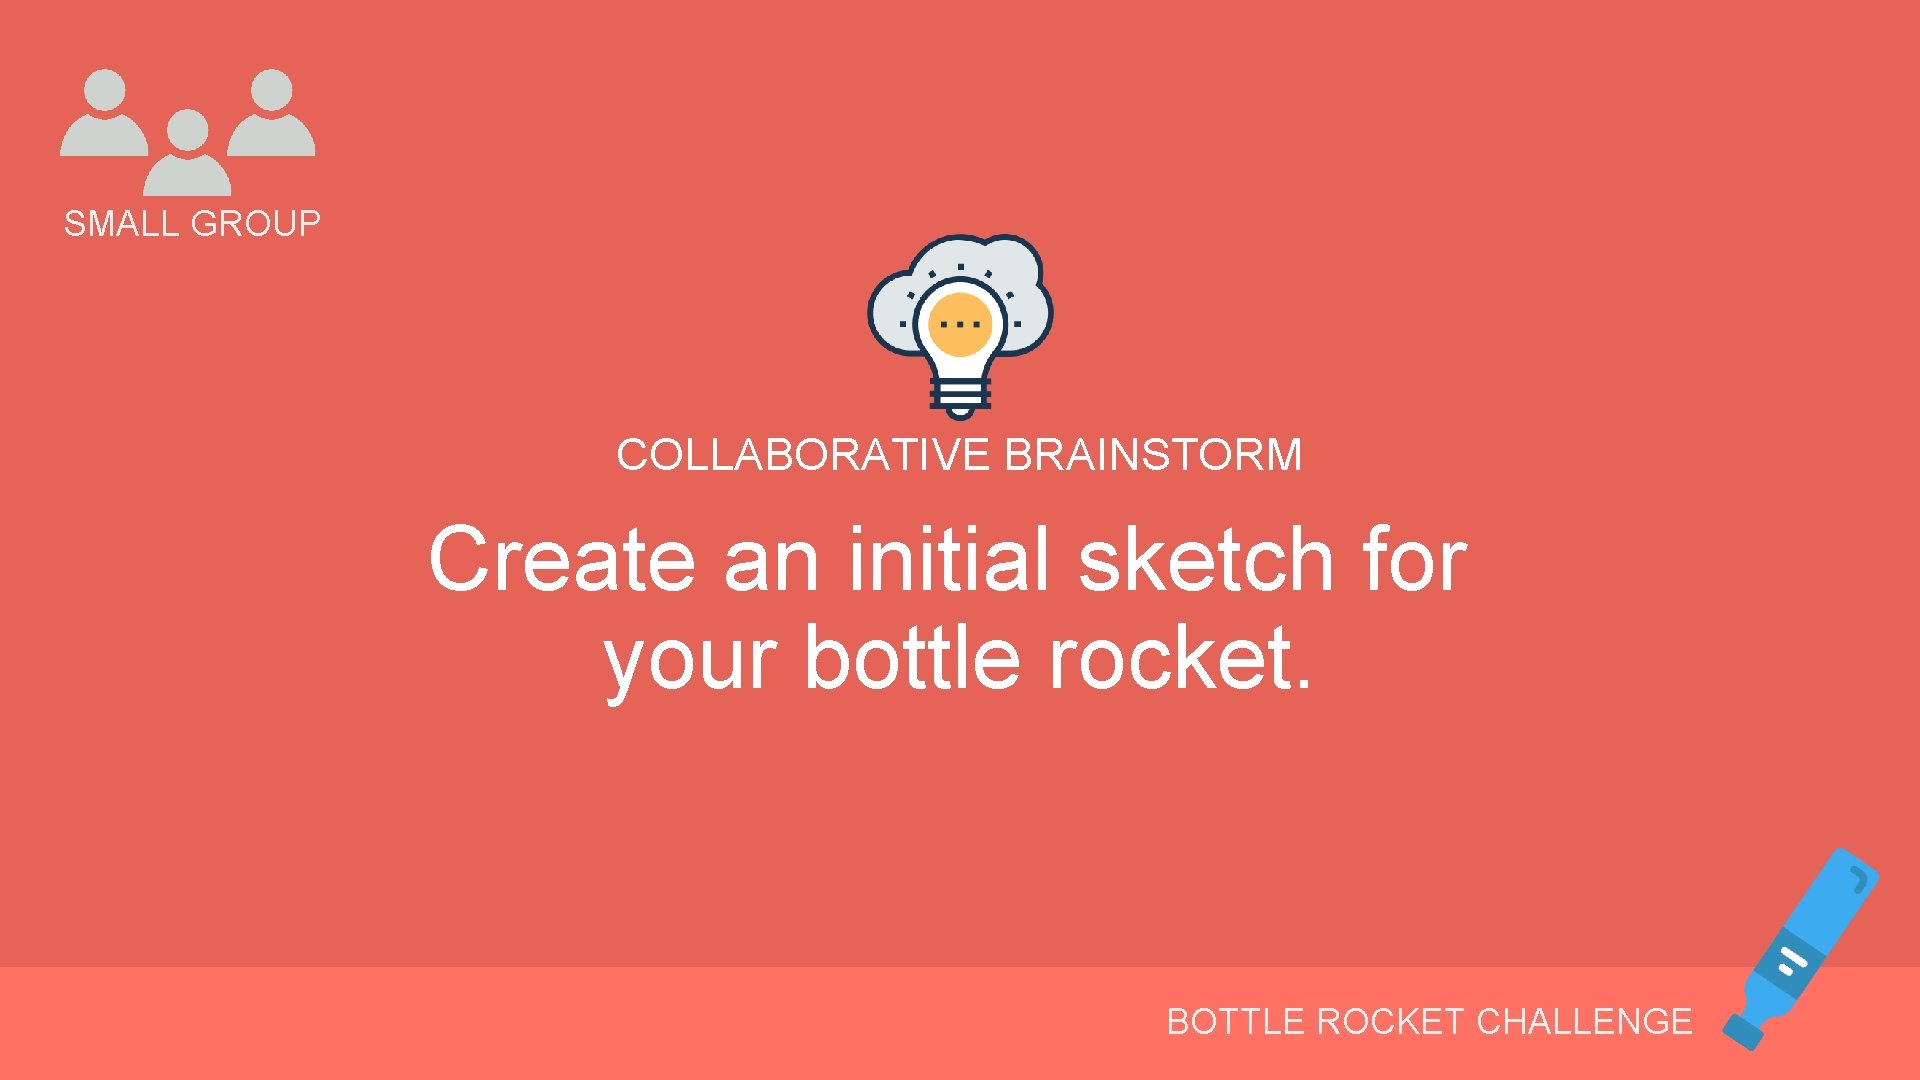 SMALL GROUP COLLABORATIVE BRAINSTORM Create an initial sketch for your bottle rocket. BOTTLE ROCKET